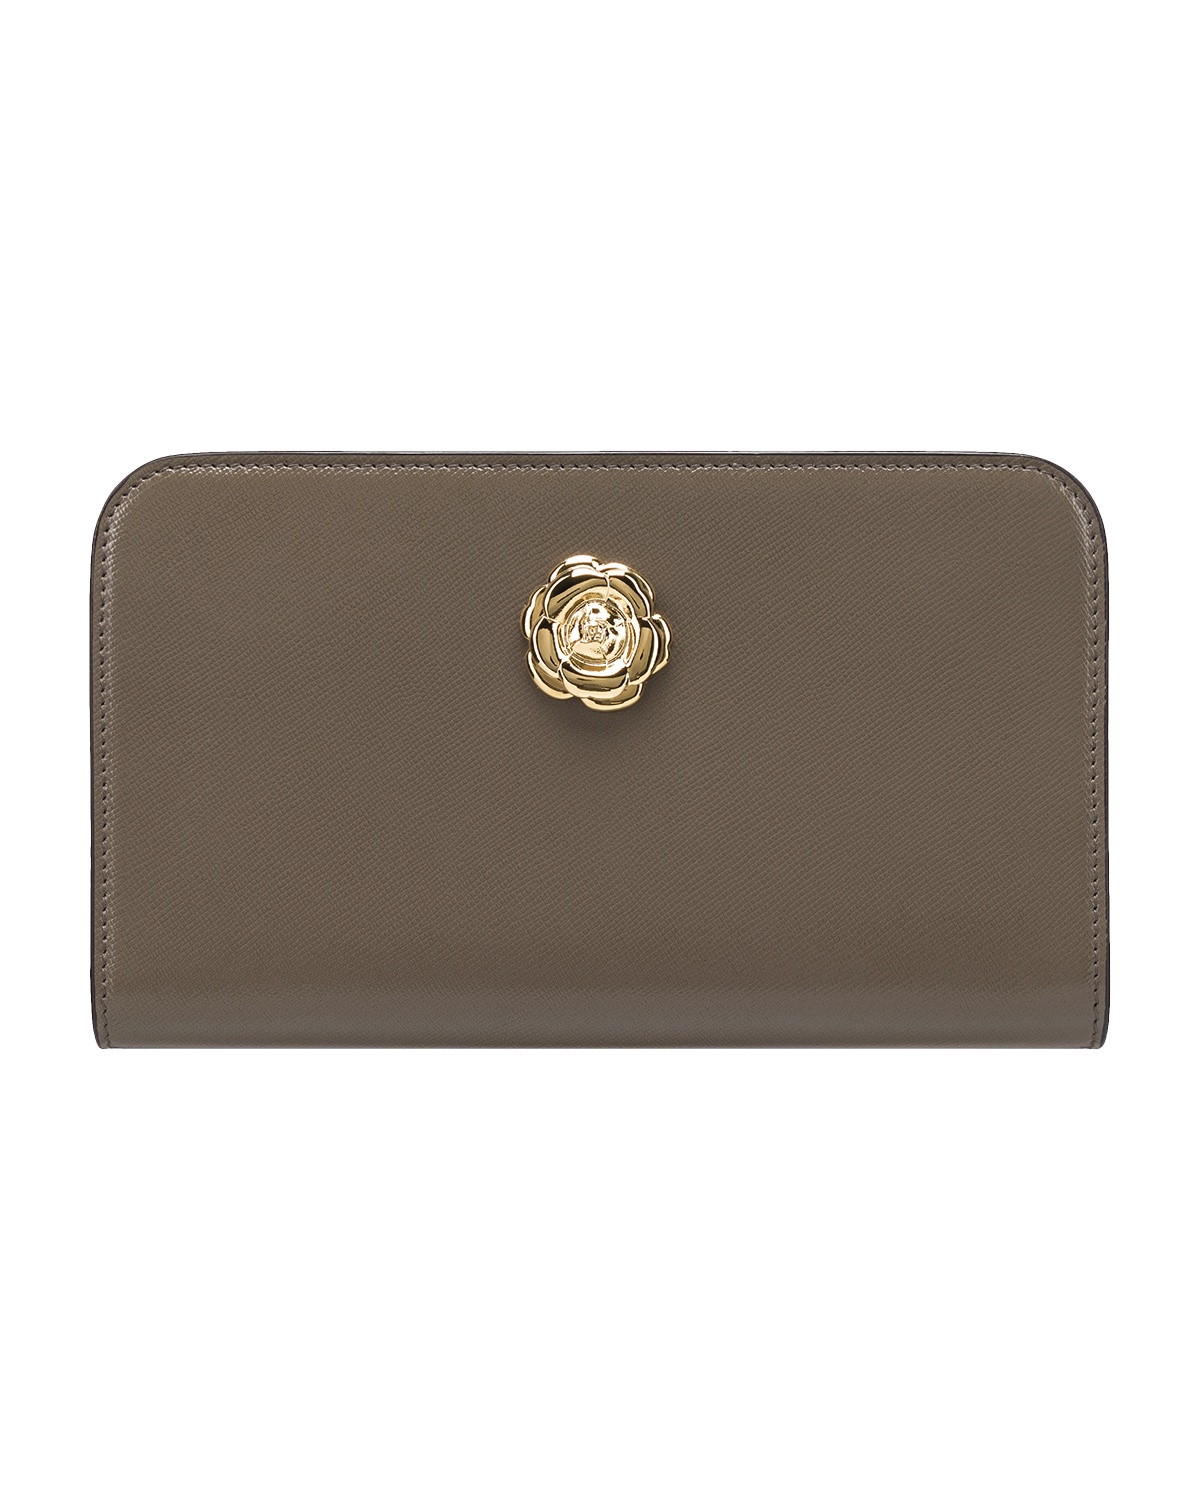 TAUPE TRAVEL WALLET - 1